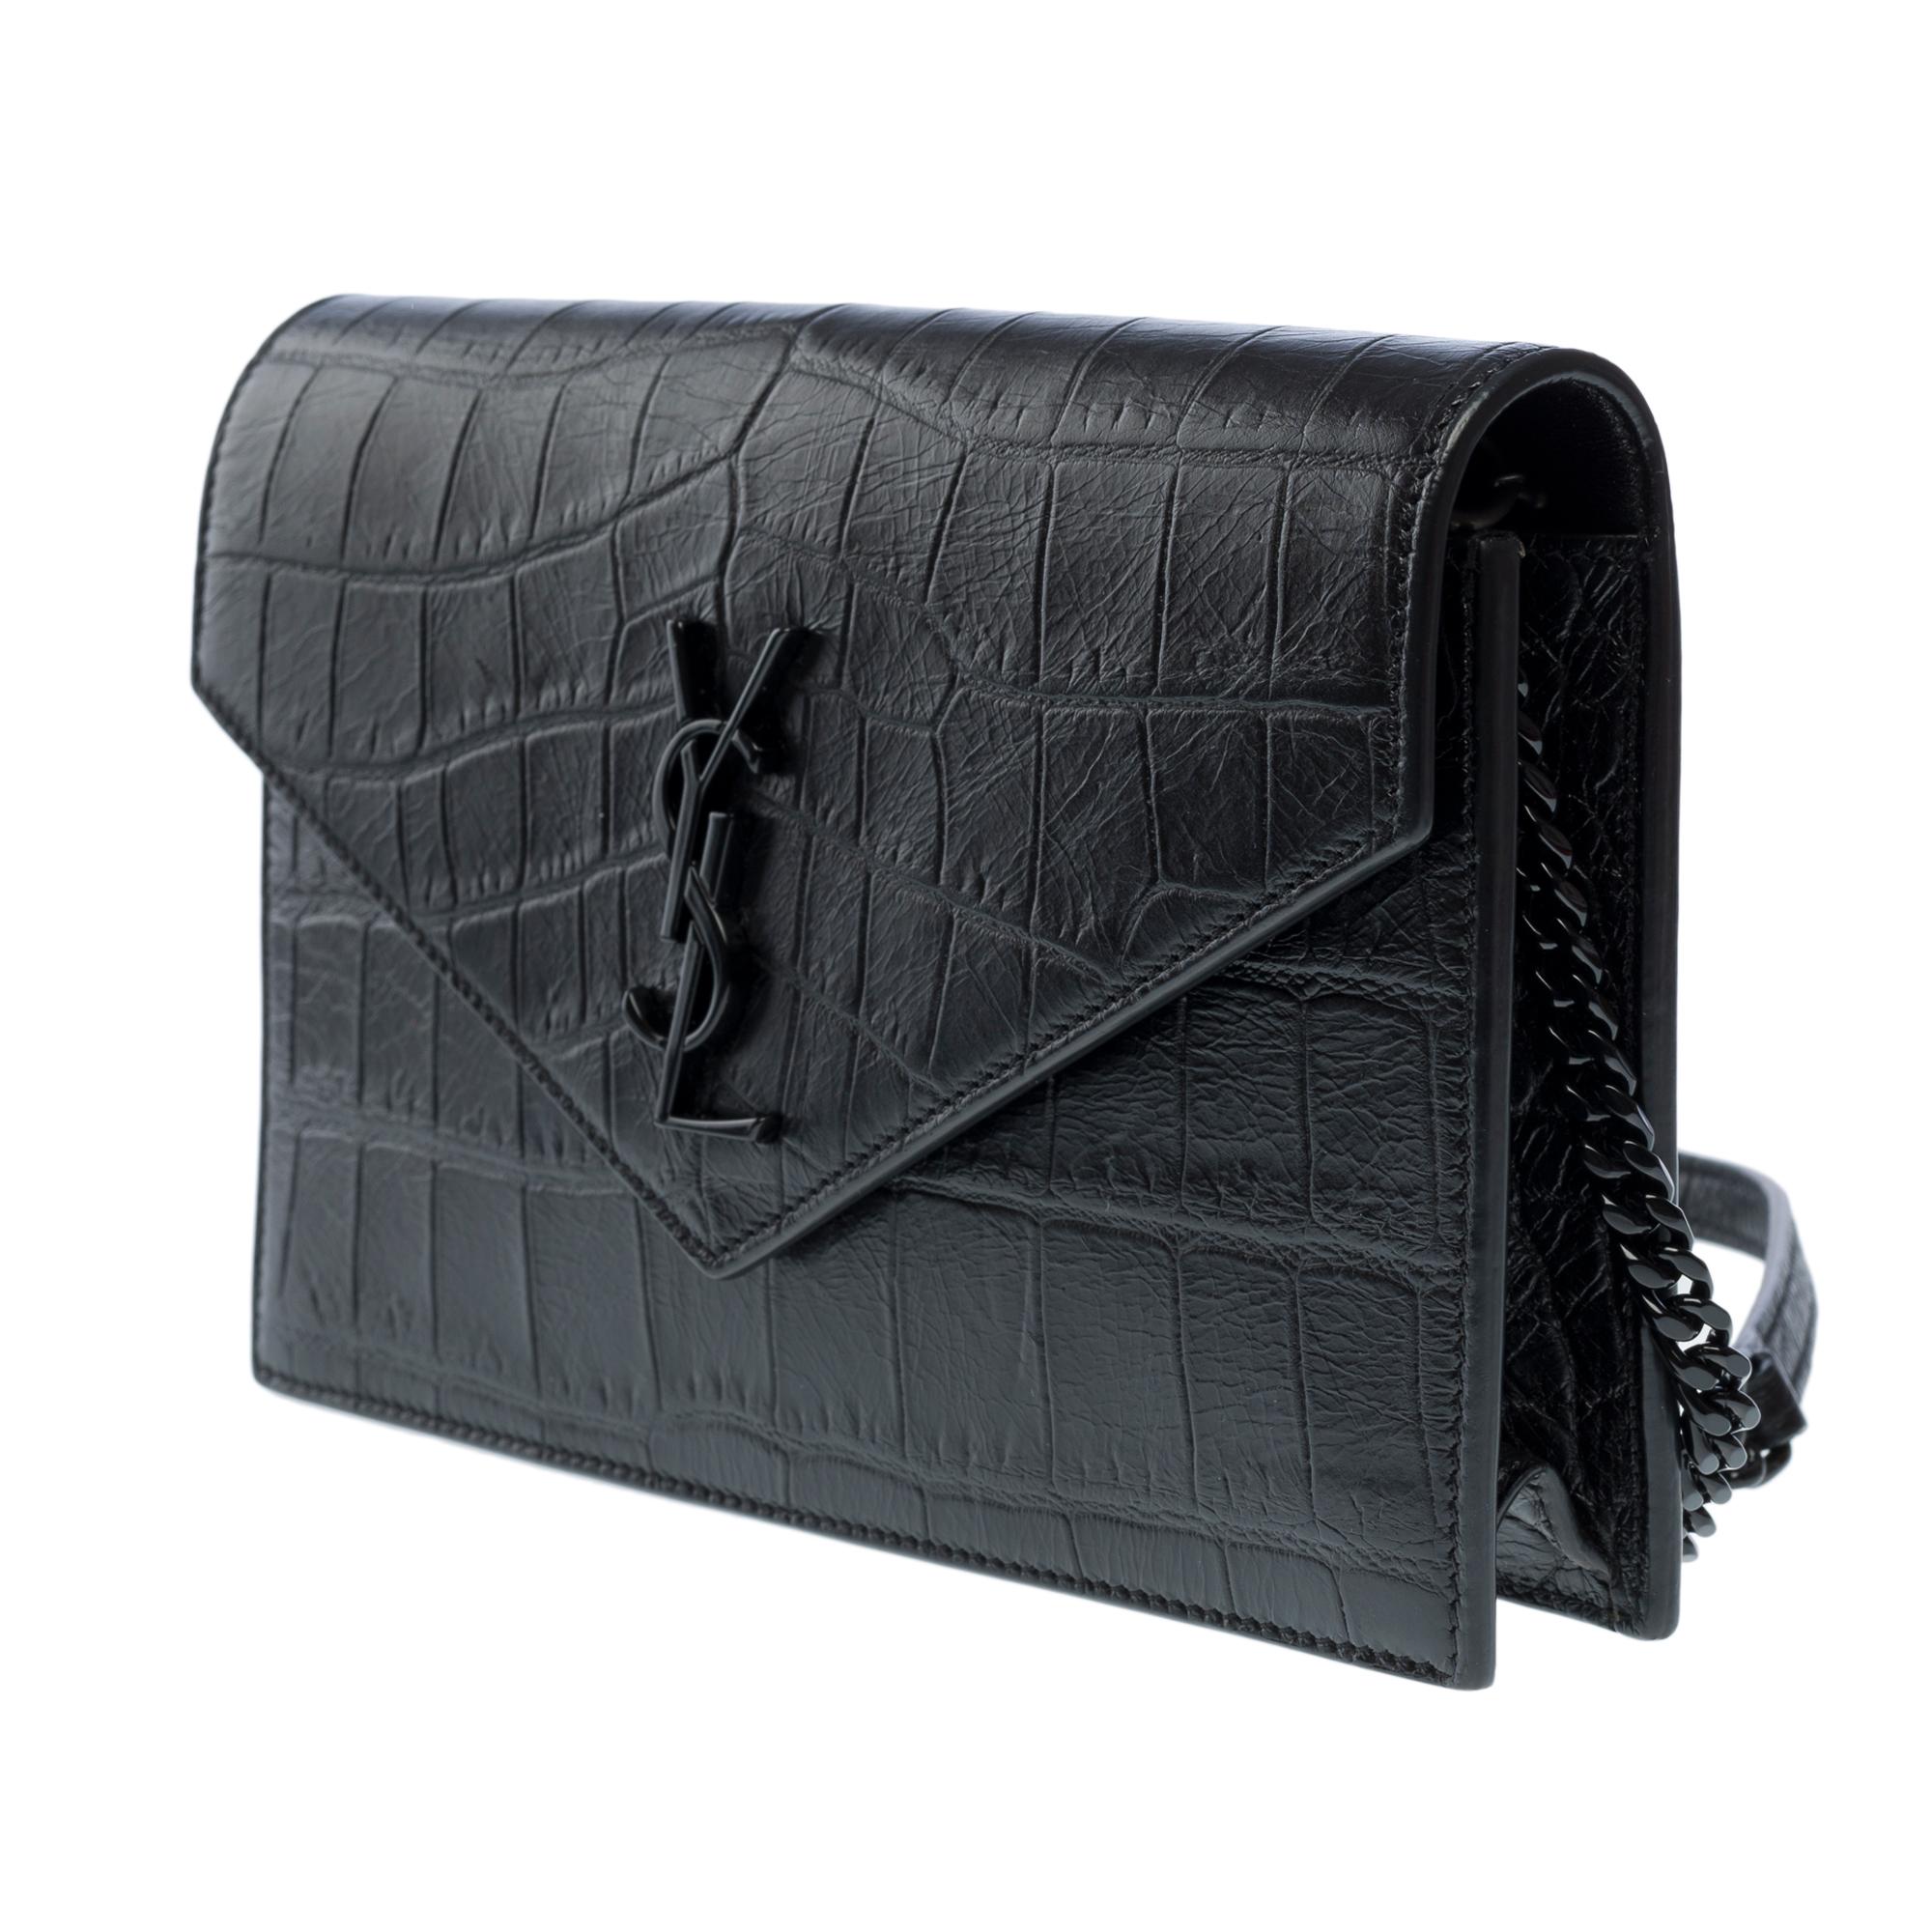 New YSL Wallet Enveloppe in black leather printed crocodile , BHW For Sale 1